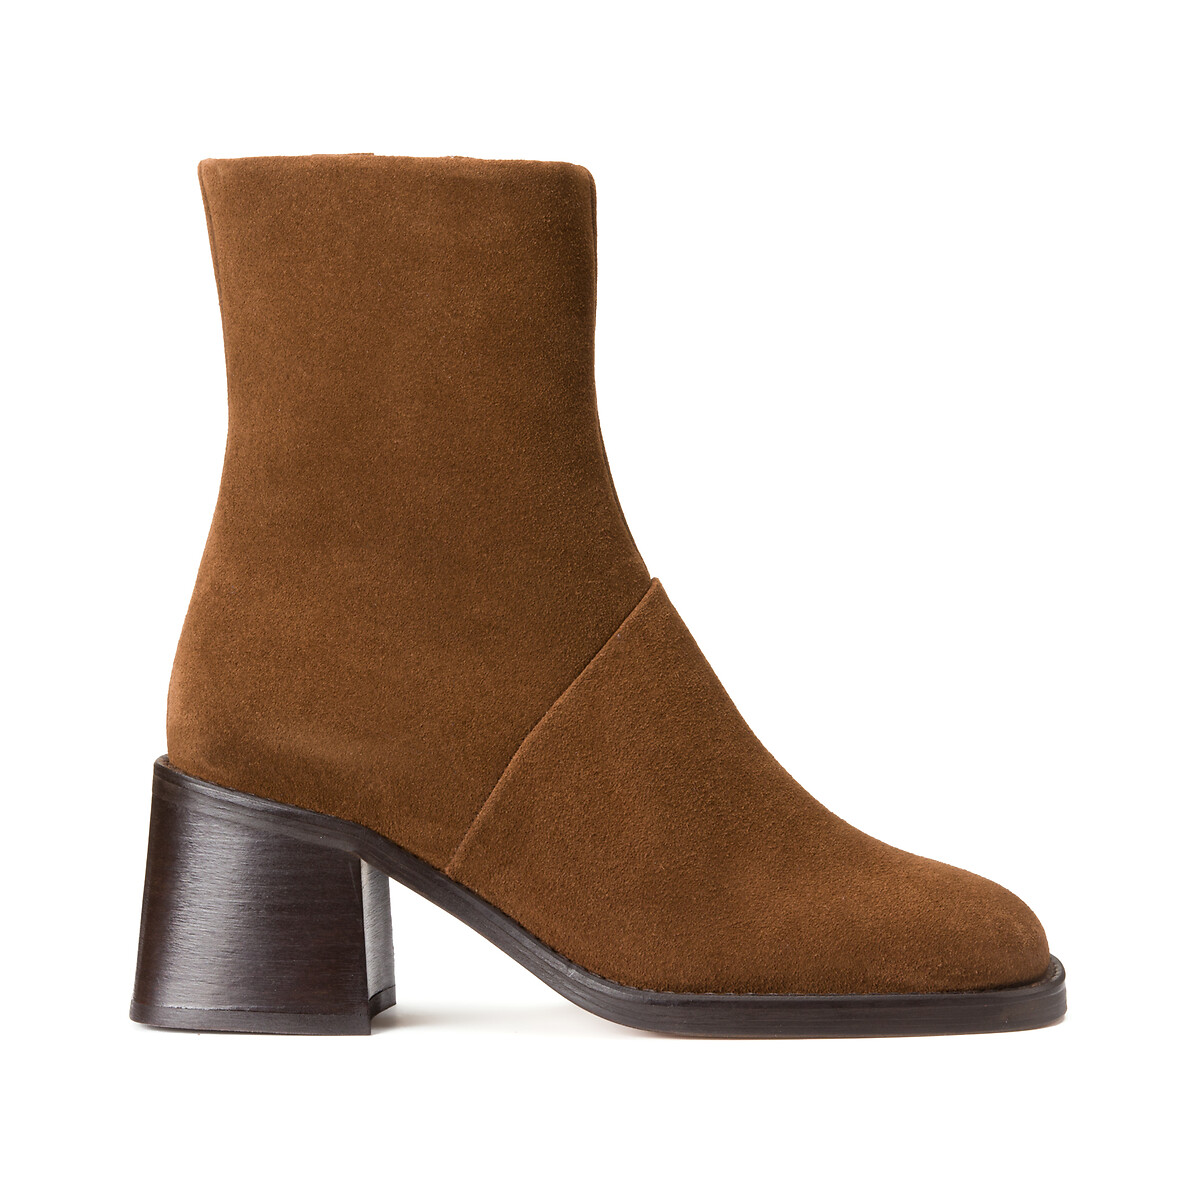 Diouna Suede Ankle Boots